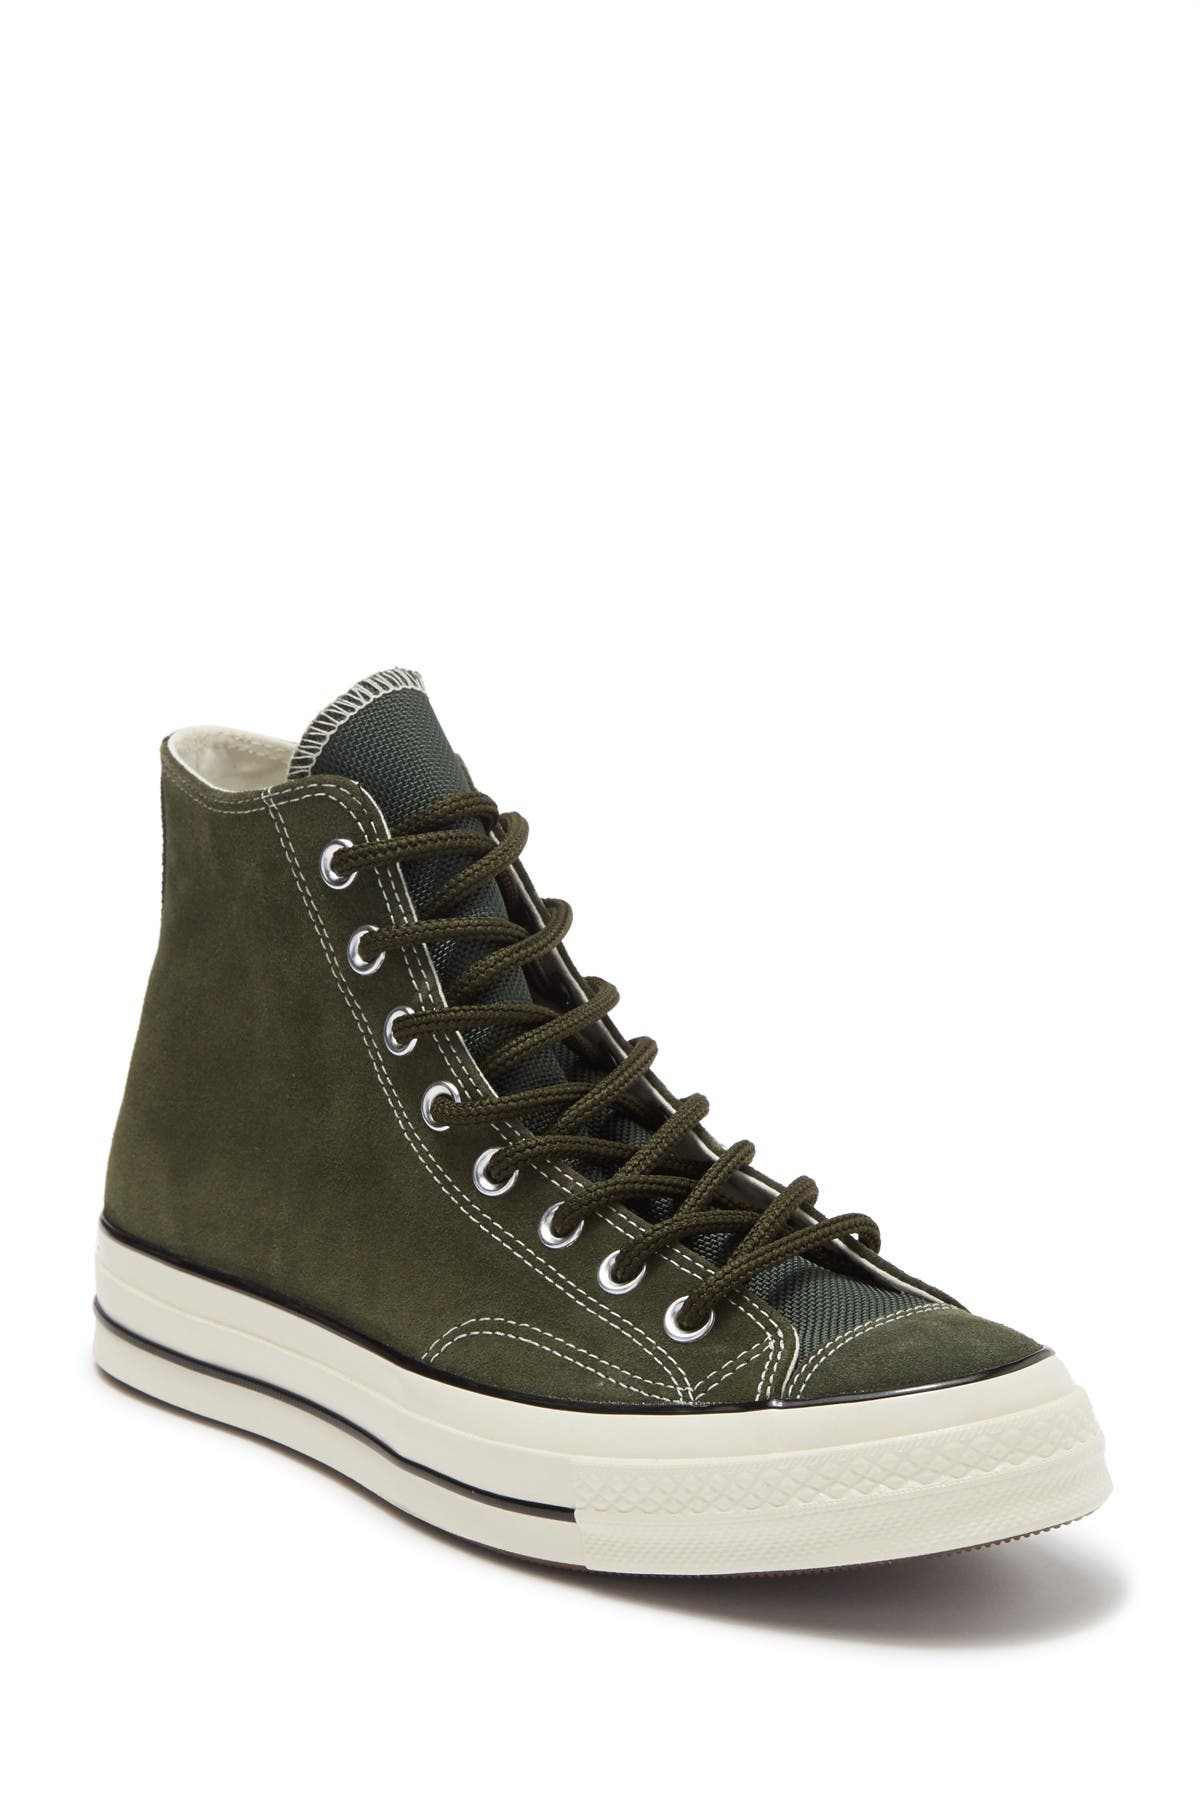 Converse | Chuck Taylor All Star Suede 